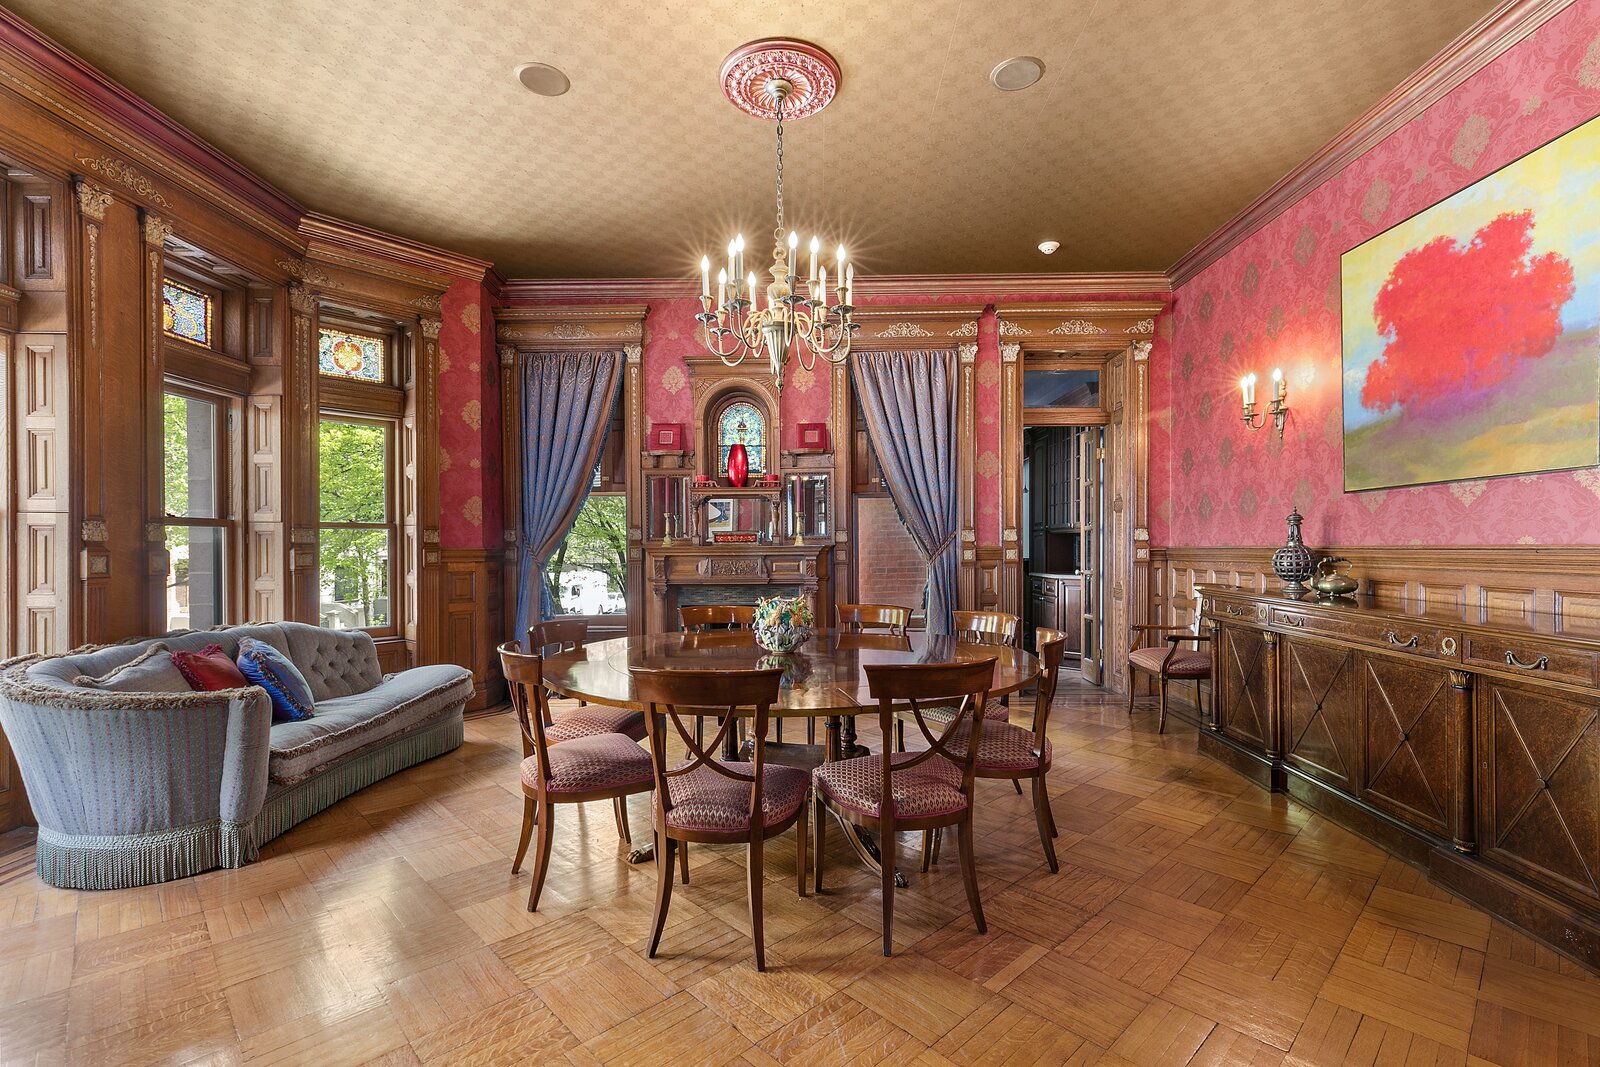 You Can Now Rent the Manhattan Mansion From Wes Anderson’s “The Royal Tenenbaums”